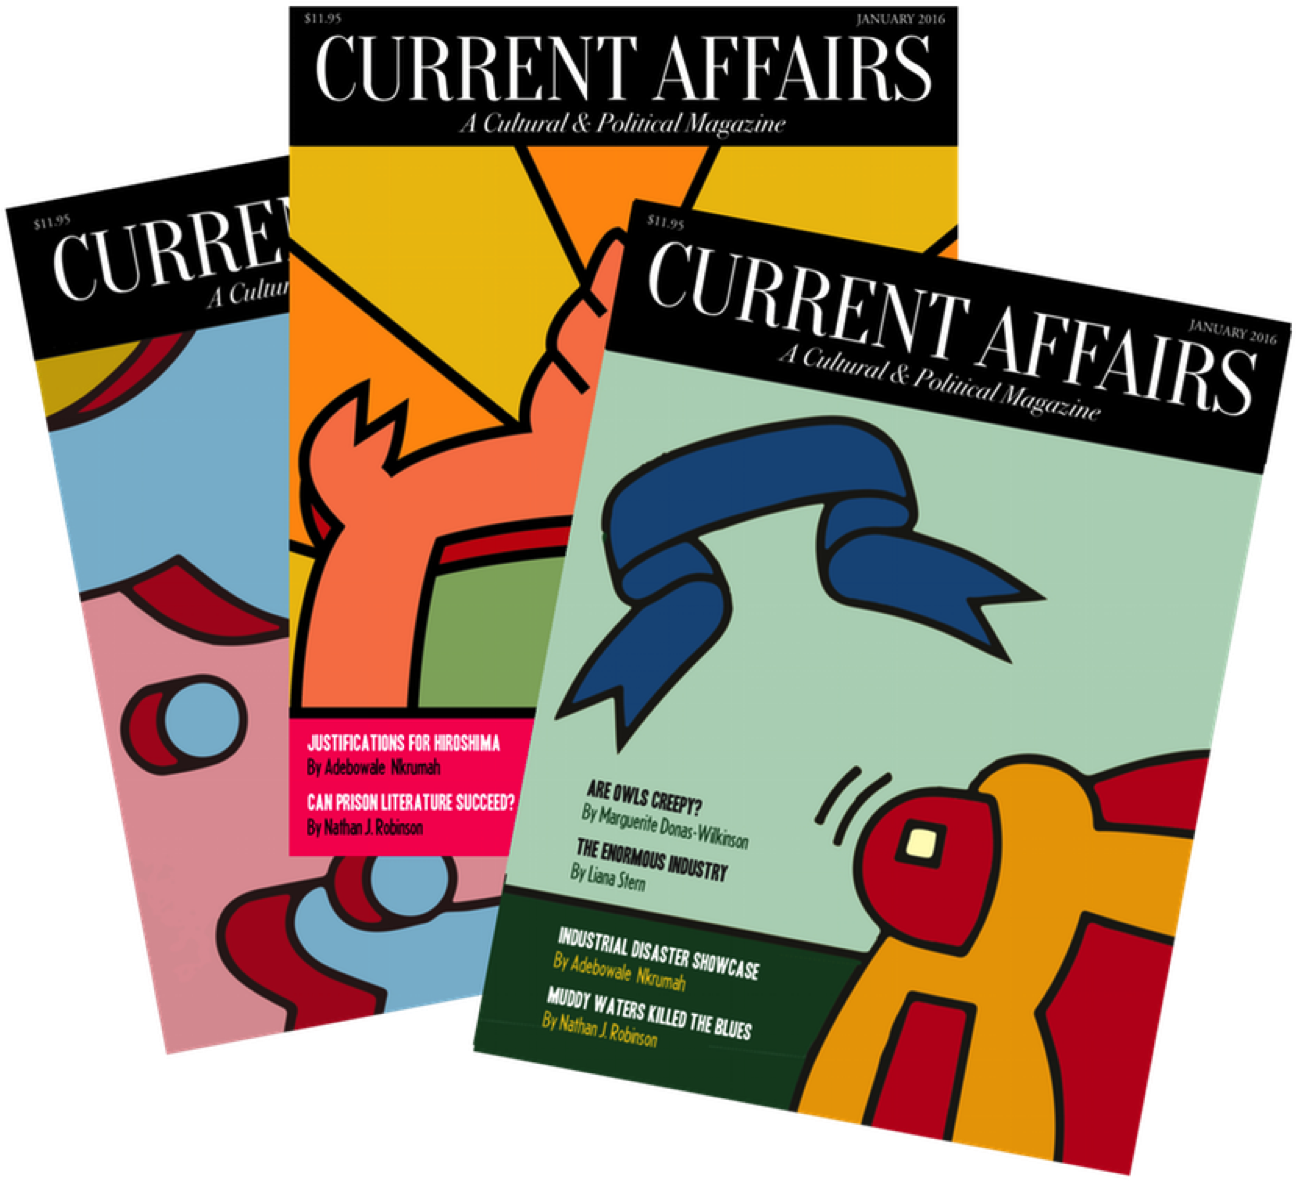 Current Affairs Magazine Covers January2016